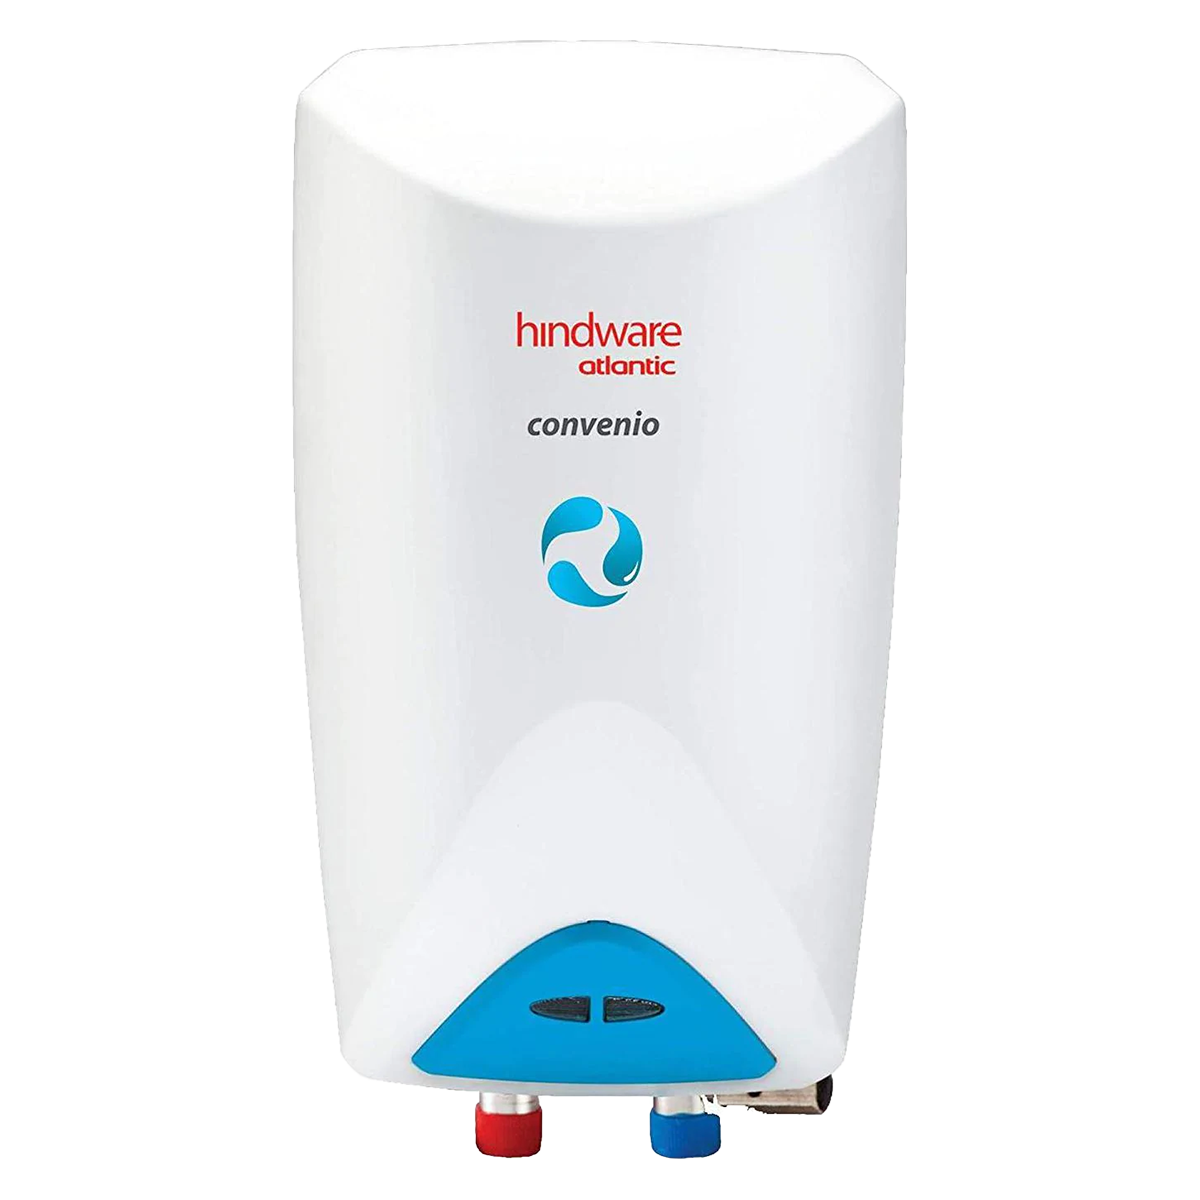 Hindware Atlantic Convenio 3 Litres 5 Star Rating Instant Water Heater (3000 Watts, HIWHCO3WI3VSS, White)_1